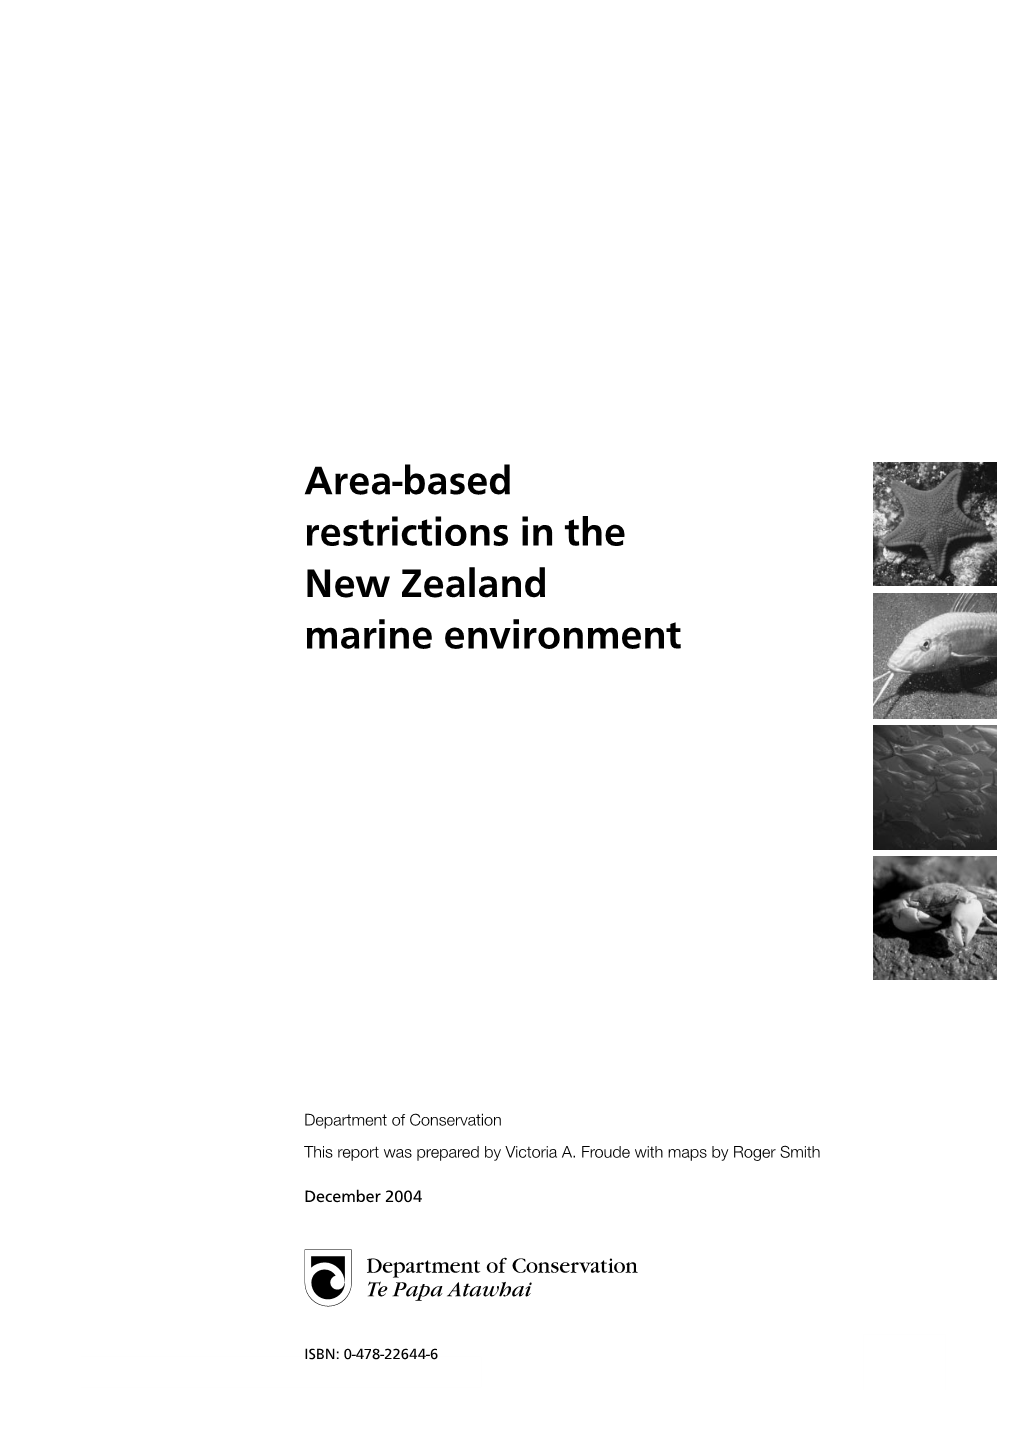 Area-Based Restrictions in the New Zealand Marine Environment